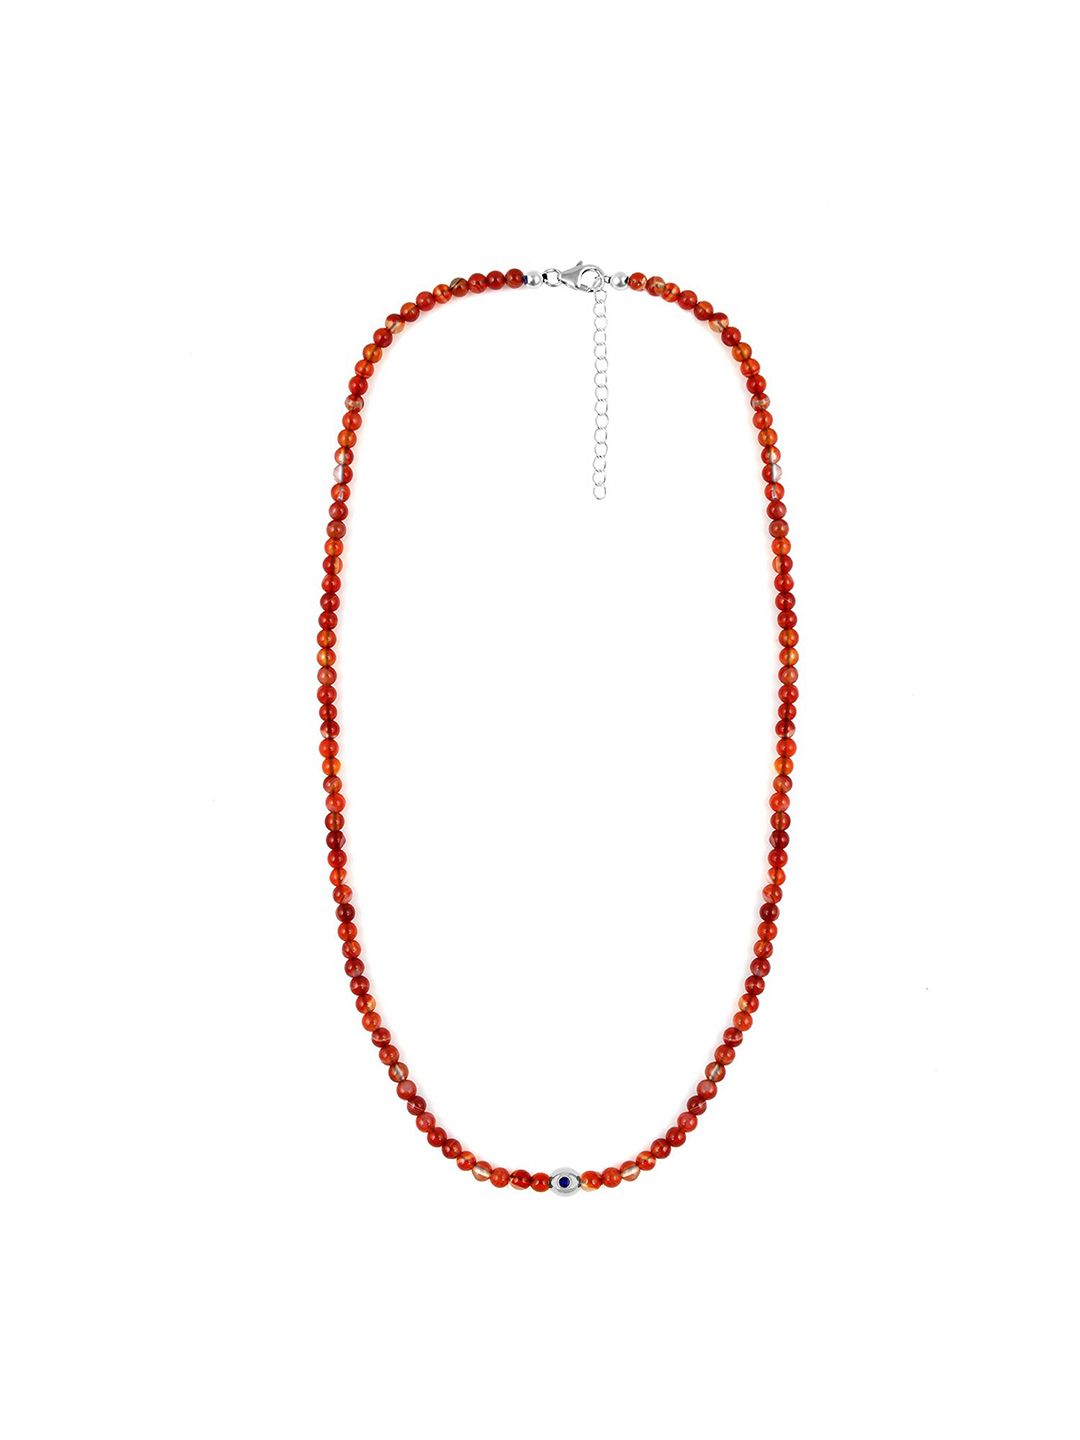 LA SOULA Red Sterling Silver Enamelled Necklace Price in India